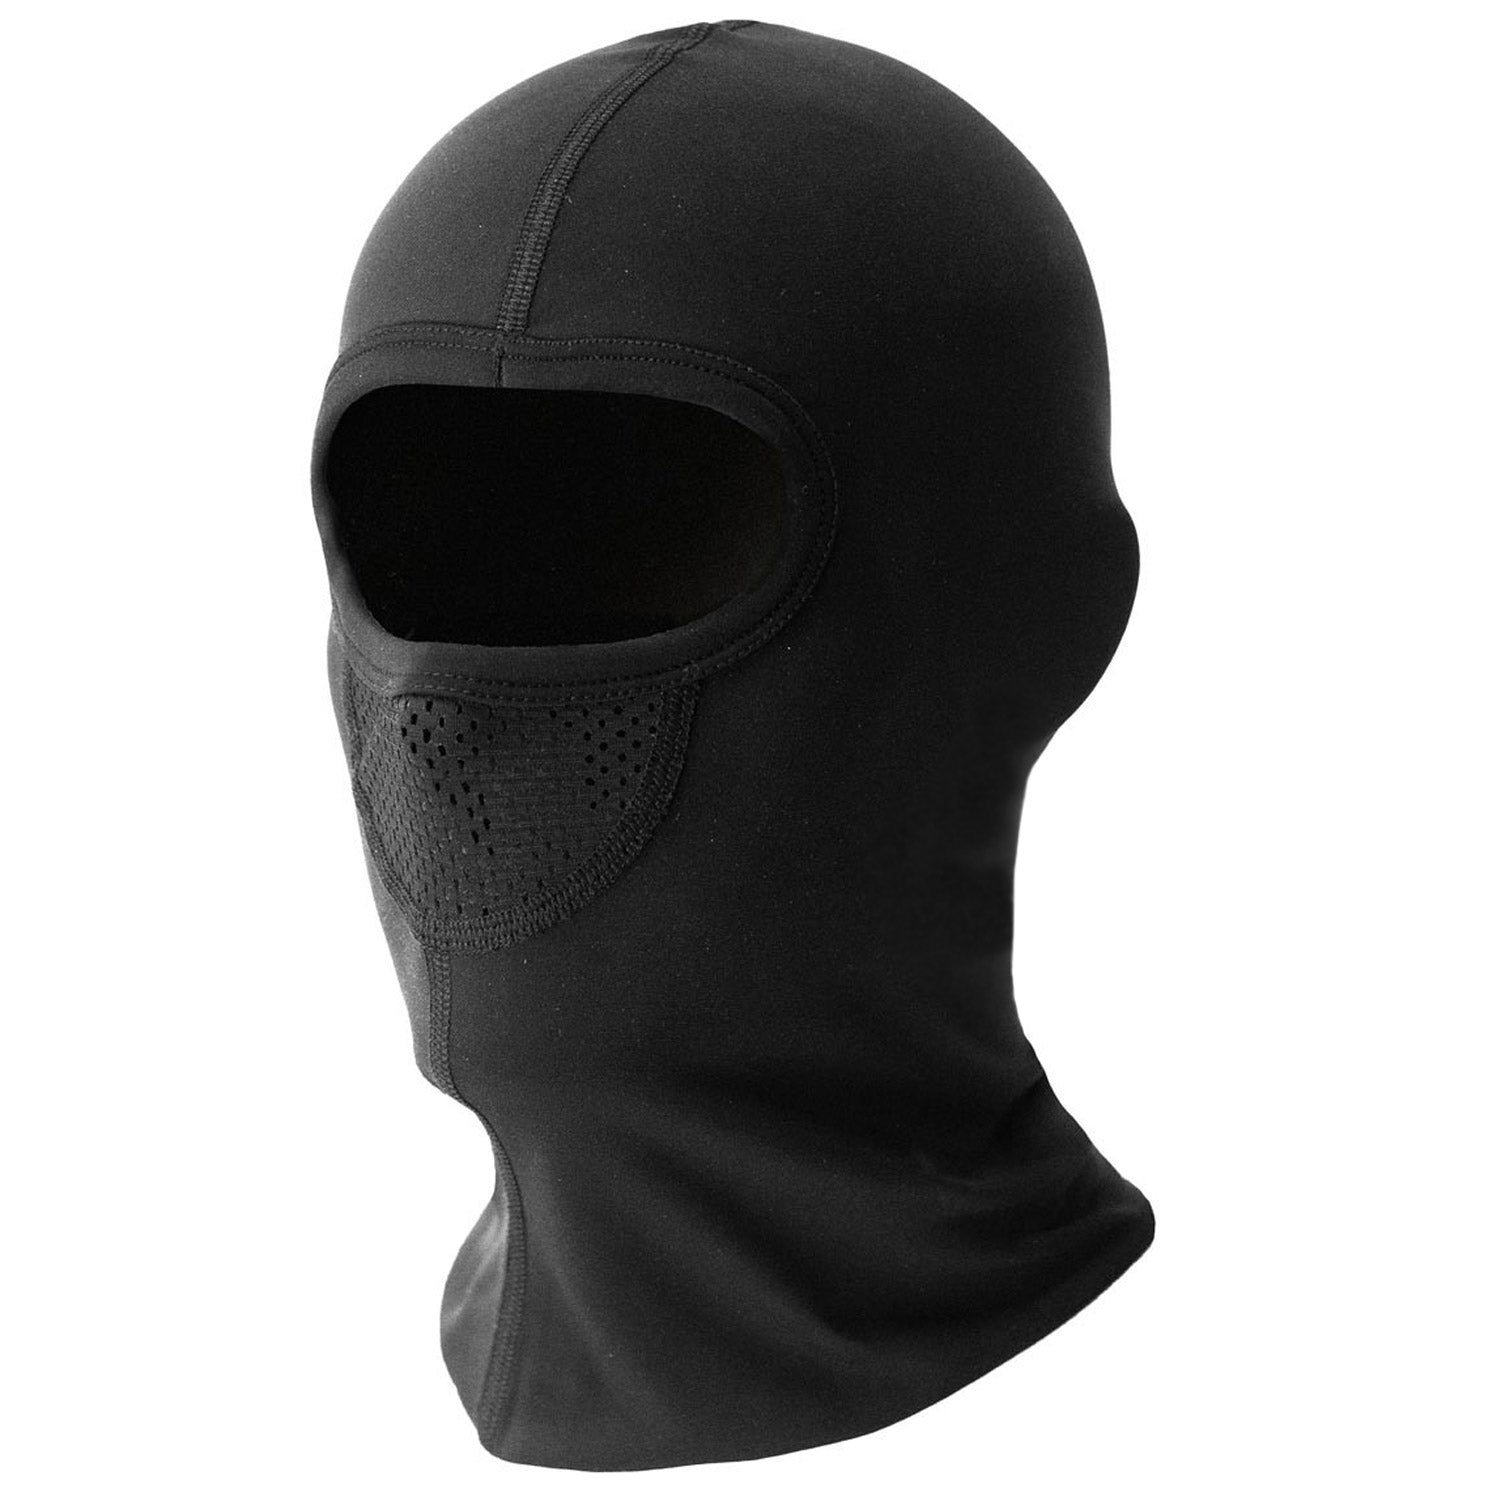 Balaclava Northwave Full Face - Black | All4cycling